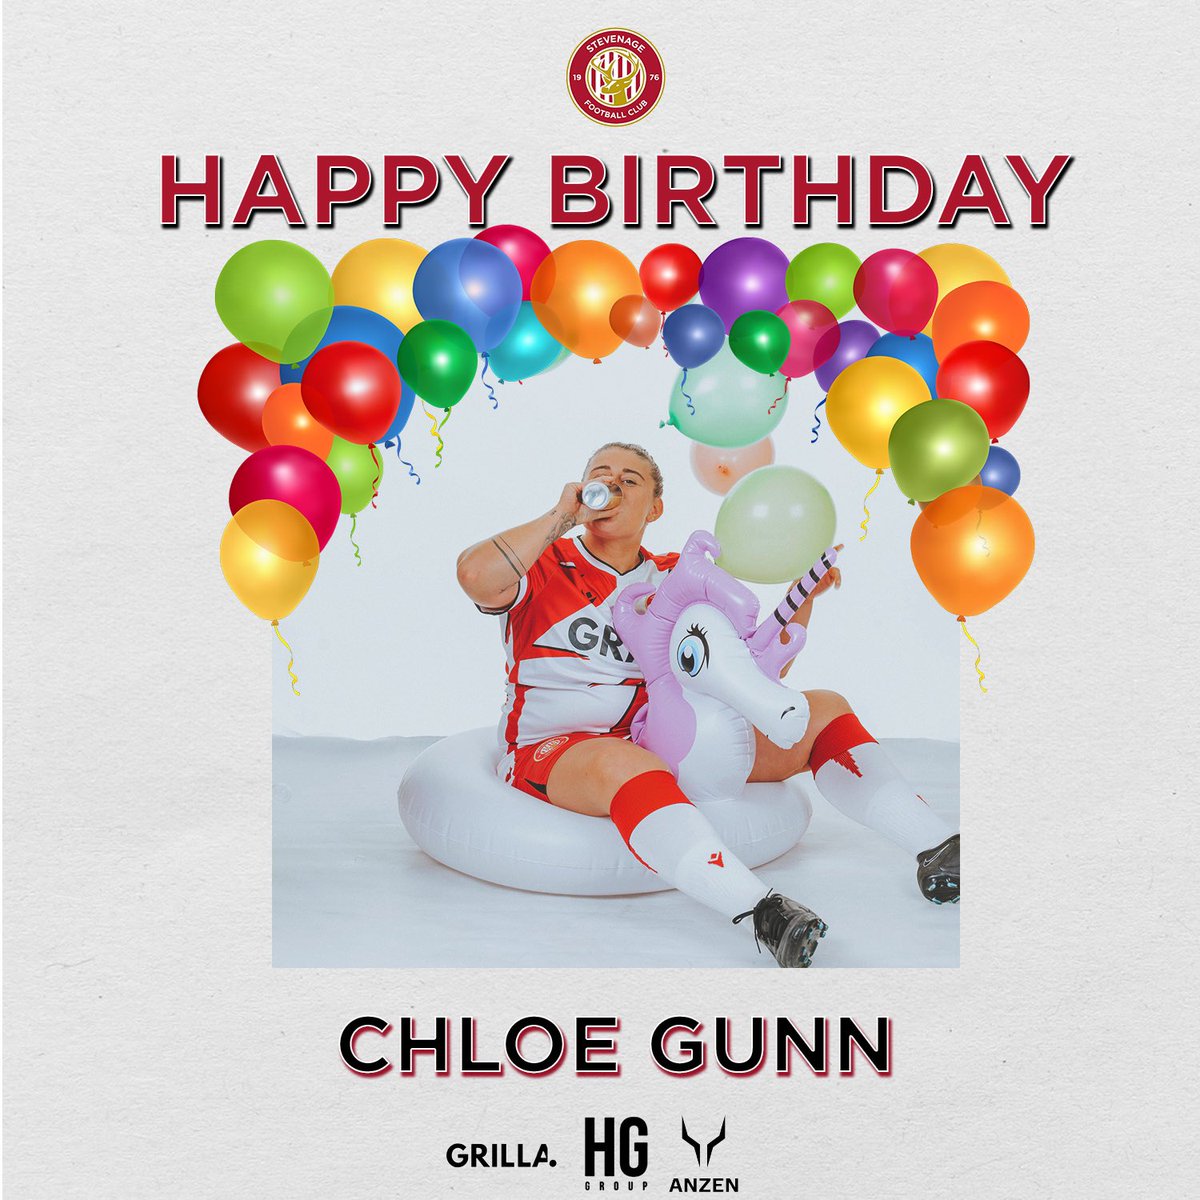 Everyone at SFCW would like to wish @chloe_gunn04 a very happy birthday! Hope you have a great day, Gunny 🥳🥳 #TogetherForBoro 🔴⚪️